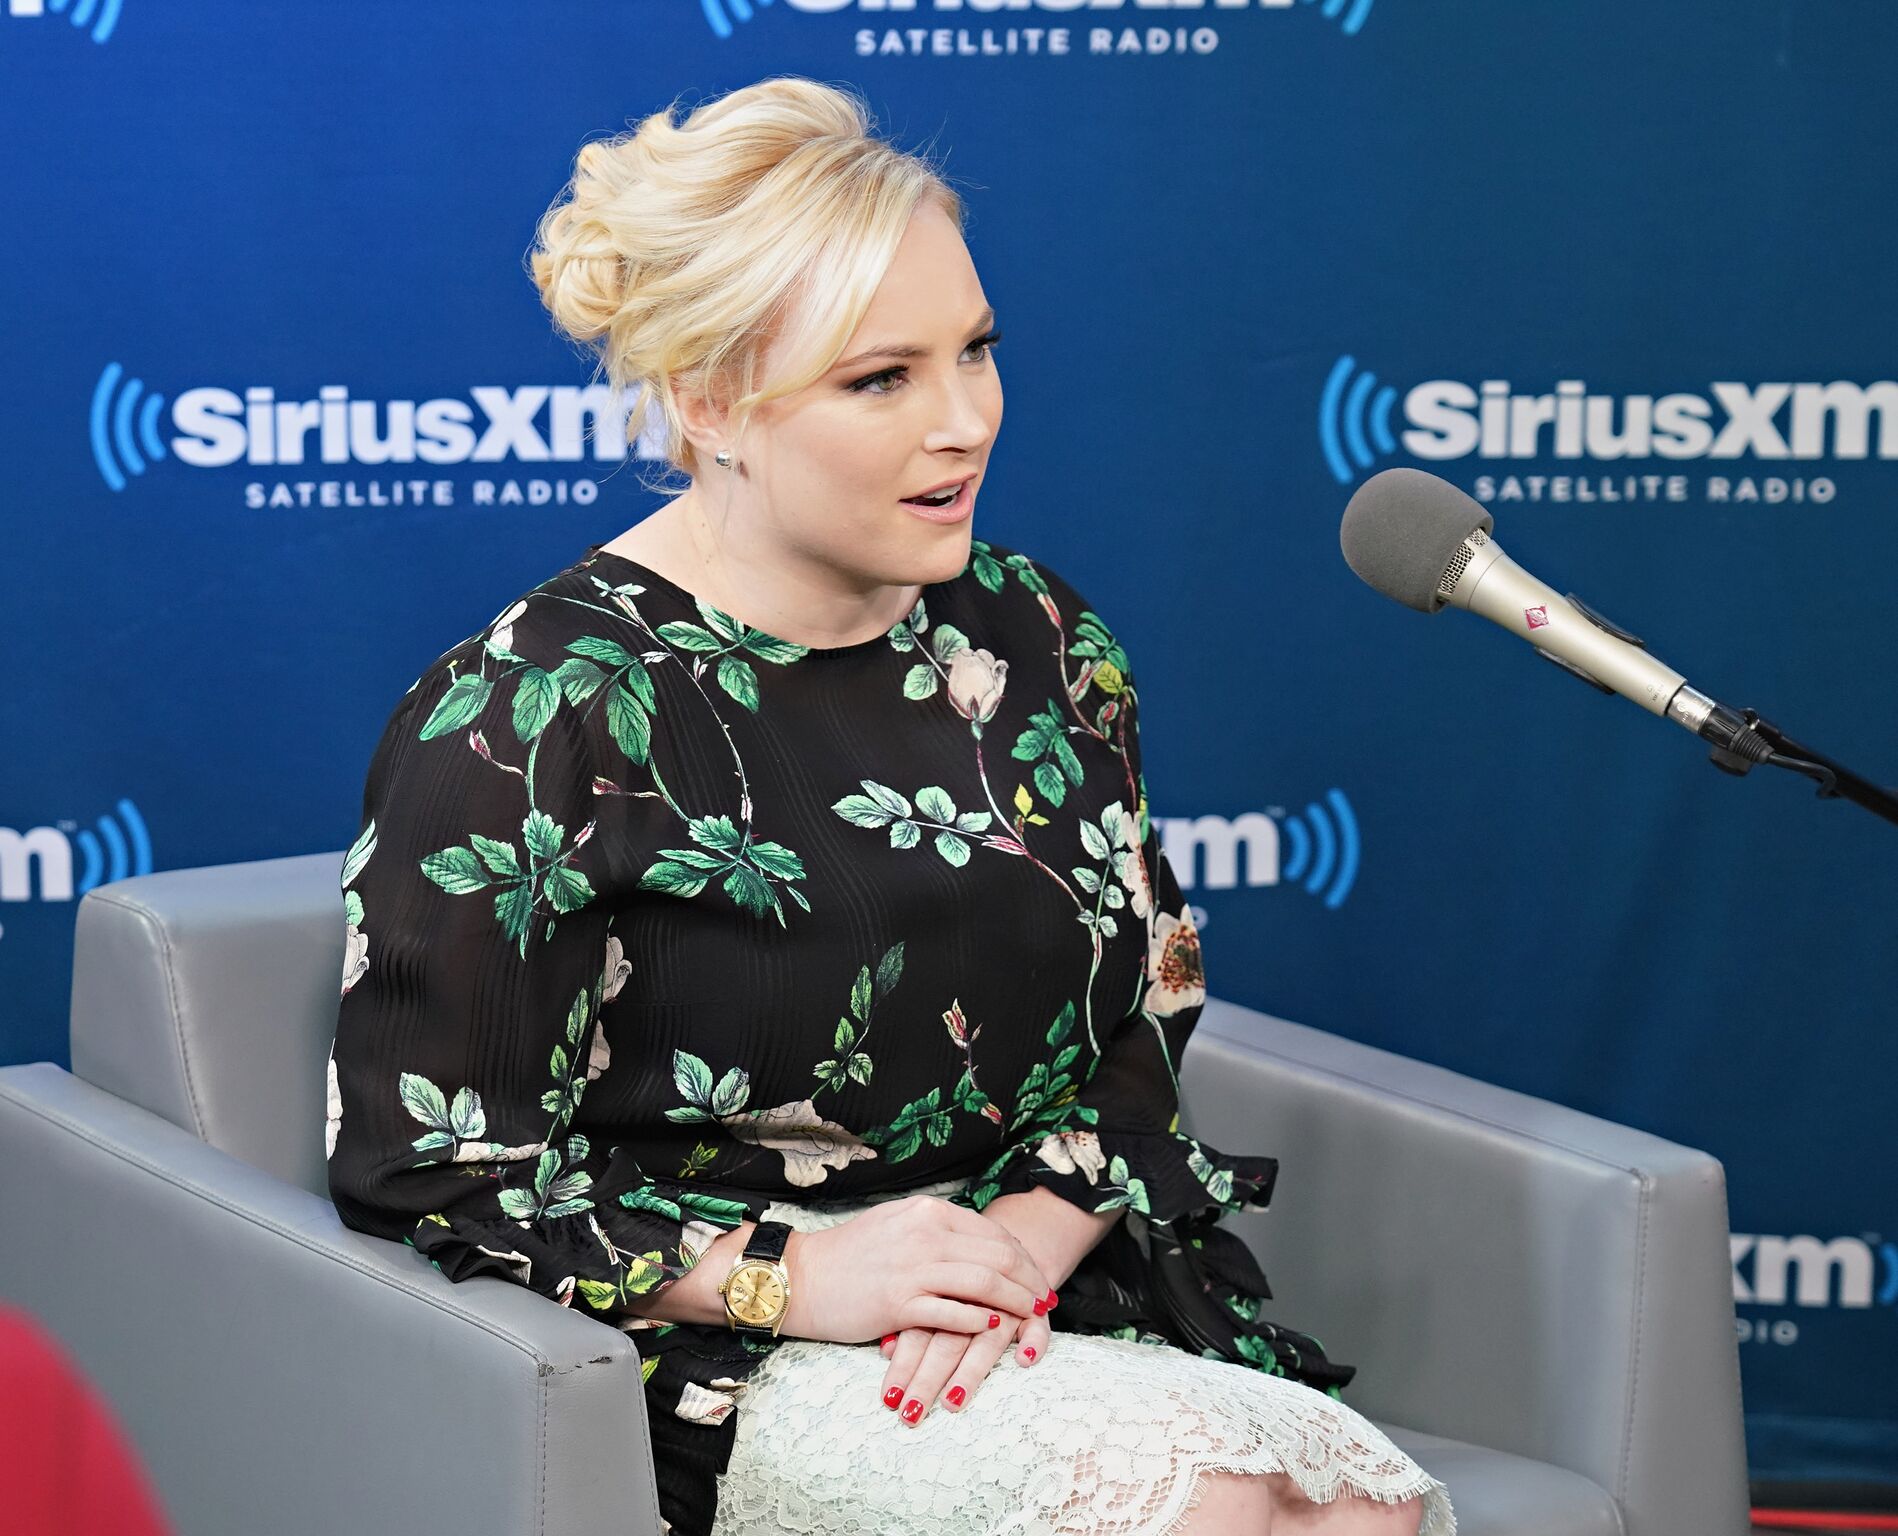 Meghan McCain joins host Julie Mason during a SiriusXM event on February 5, 2018 | Photo: Getty Images